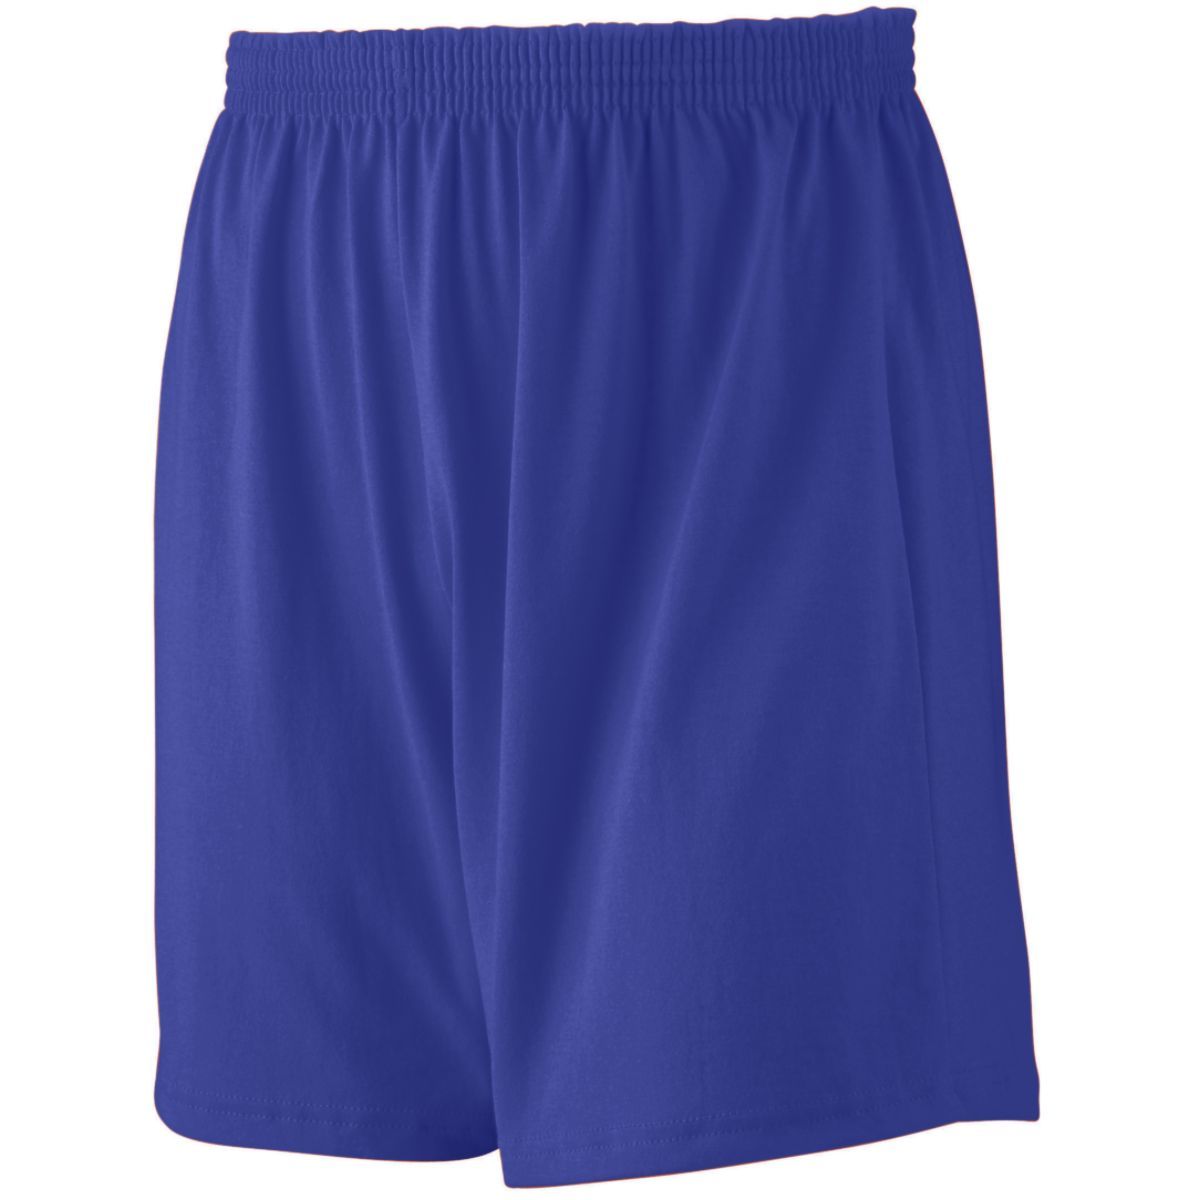 Augusta Sportswear Jersey Knit Shorts in Purple  -Part of the Adult, Adult-Shorts, Augusta-Products product lines at KanaleyCreations.com